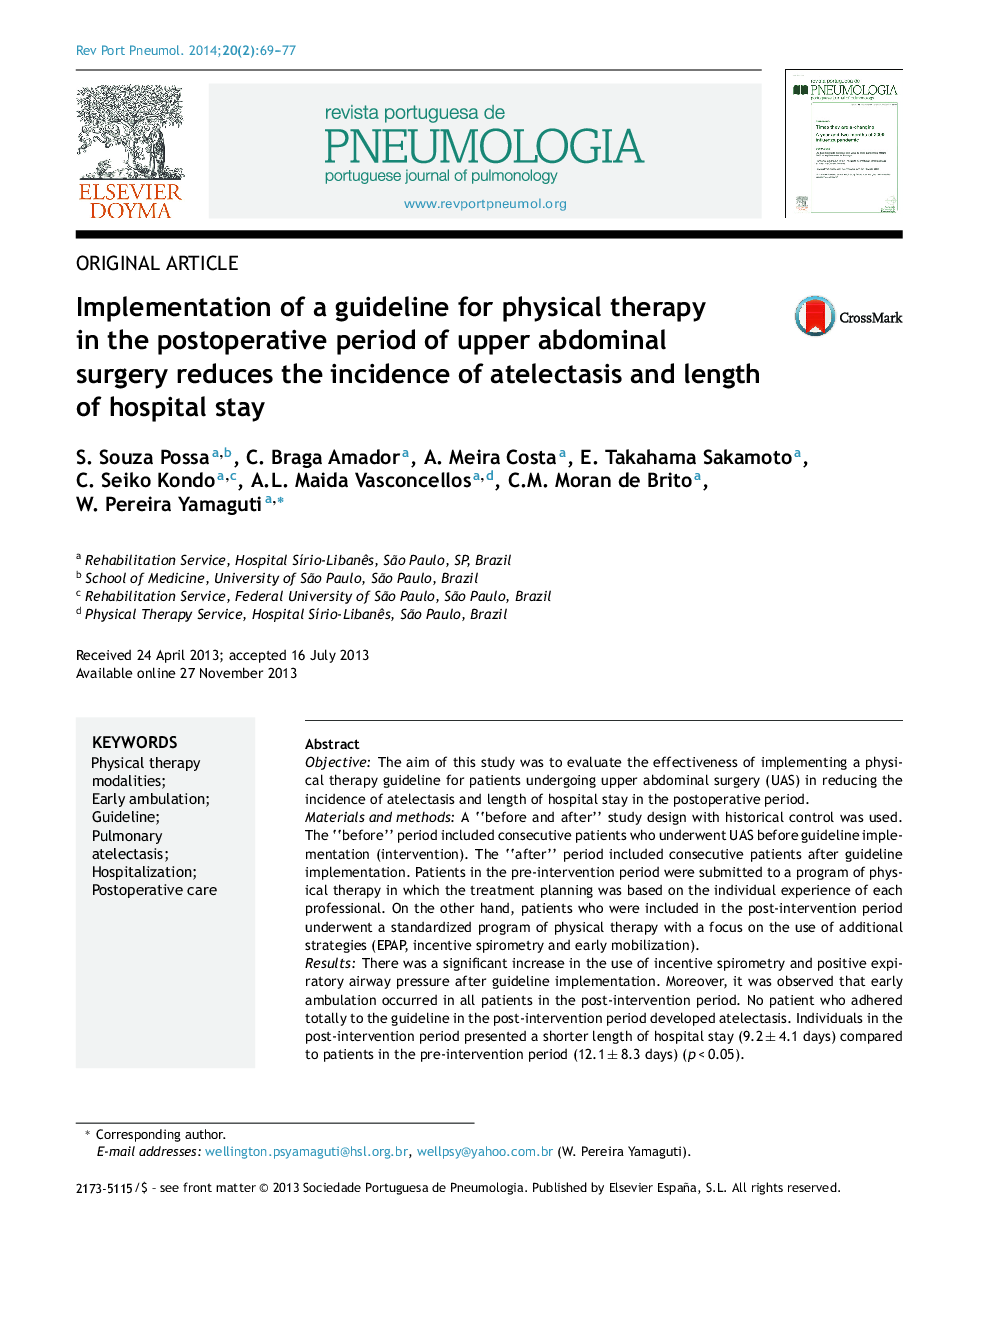 Implementation of a guideline for physical therapy in the postoperative period of upper abdominal surgery reduces the incidence of atelectasis and length of hospital stay